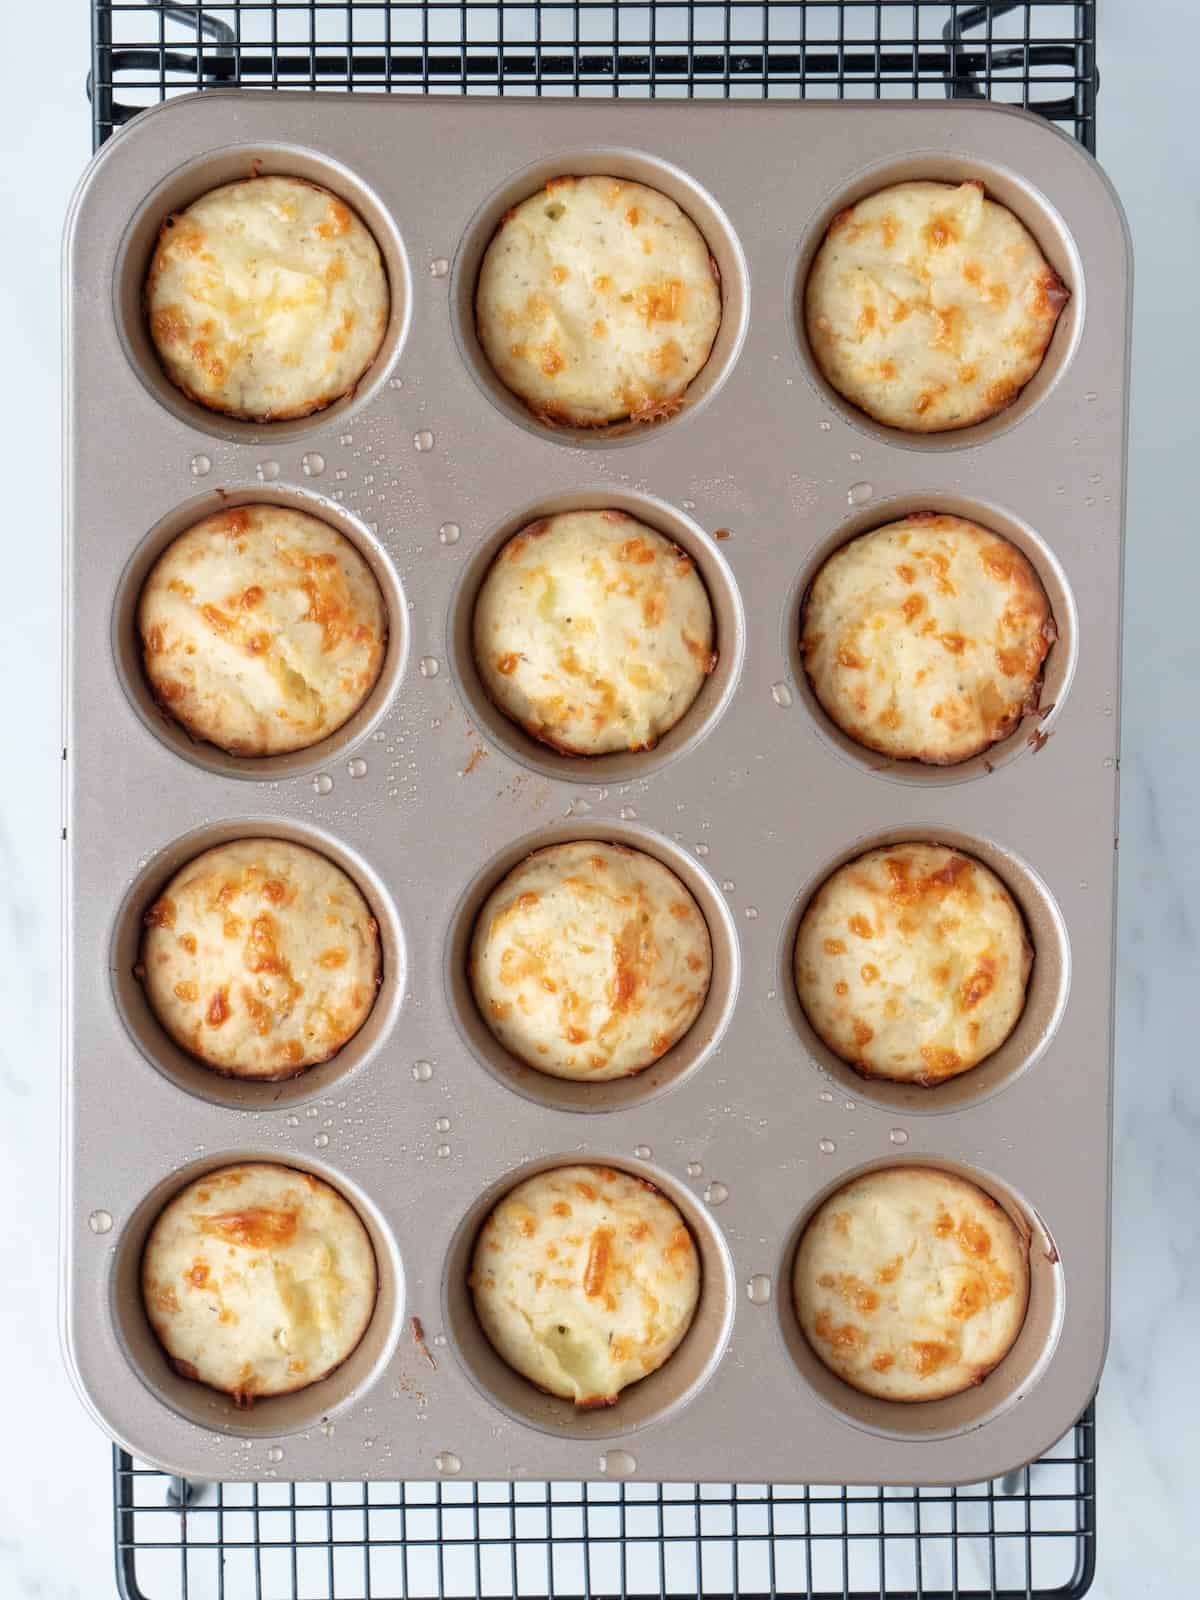 A muffin pan with 12 baked cheese pizza bites, placed on a wire rack.